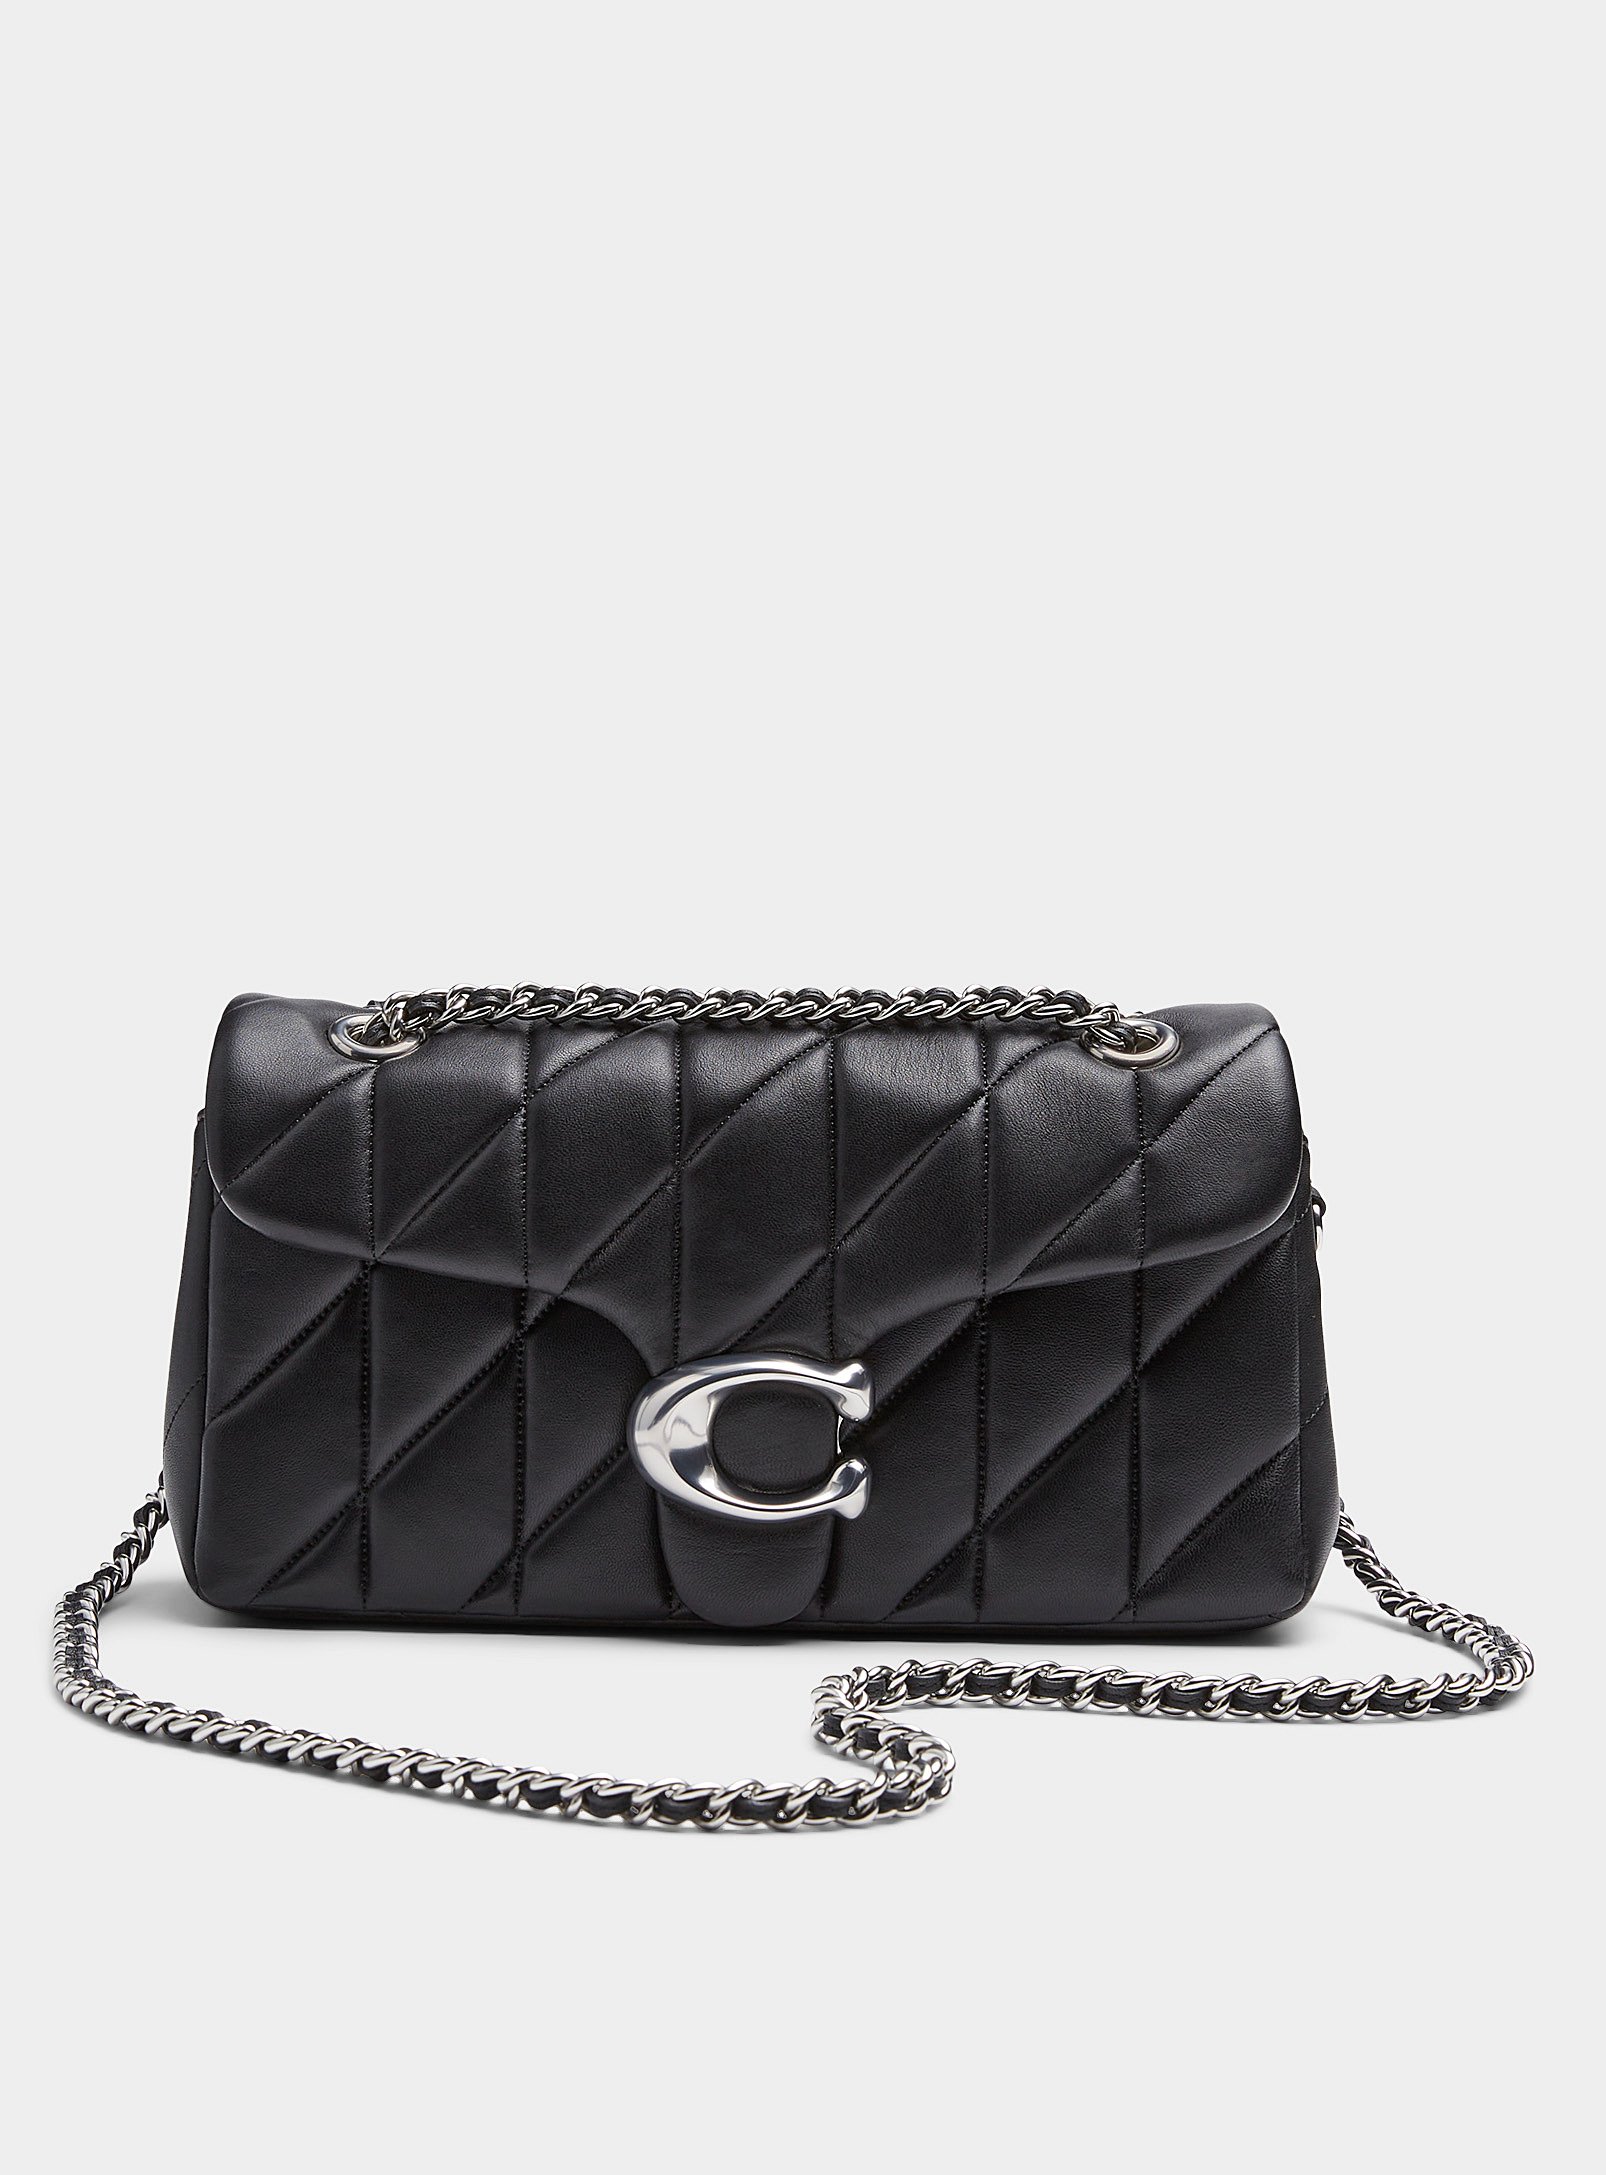 Coach - Women's Tabby quilted leather flap bag